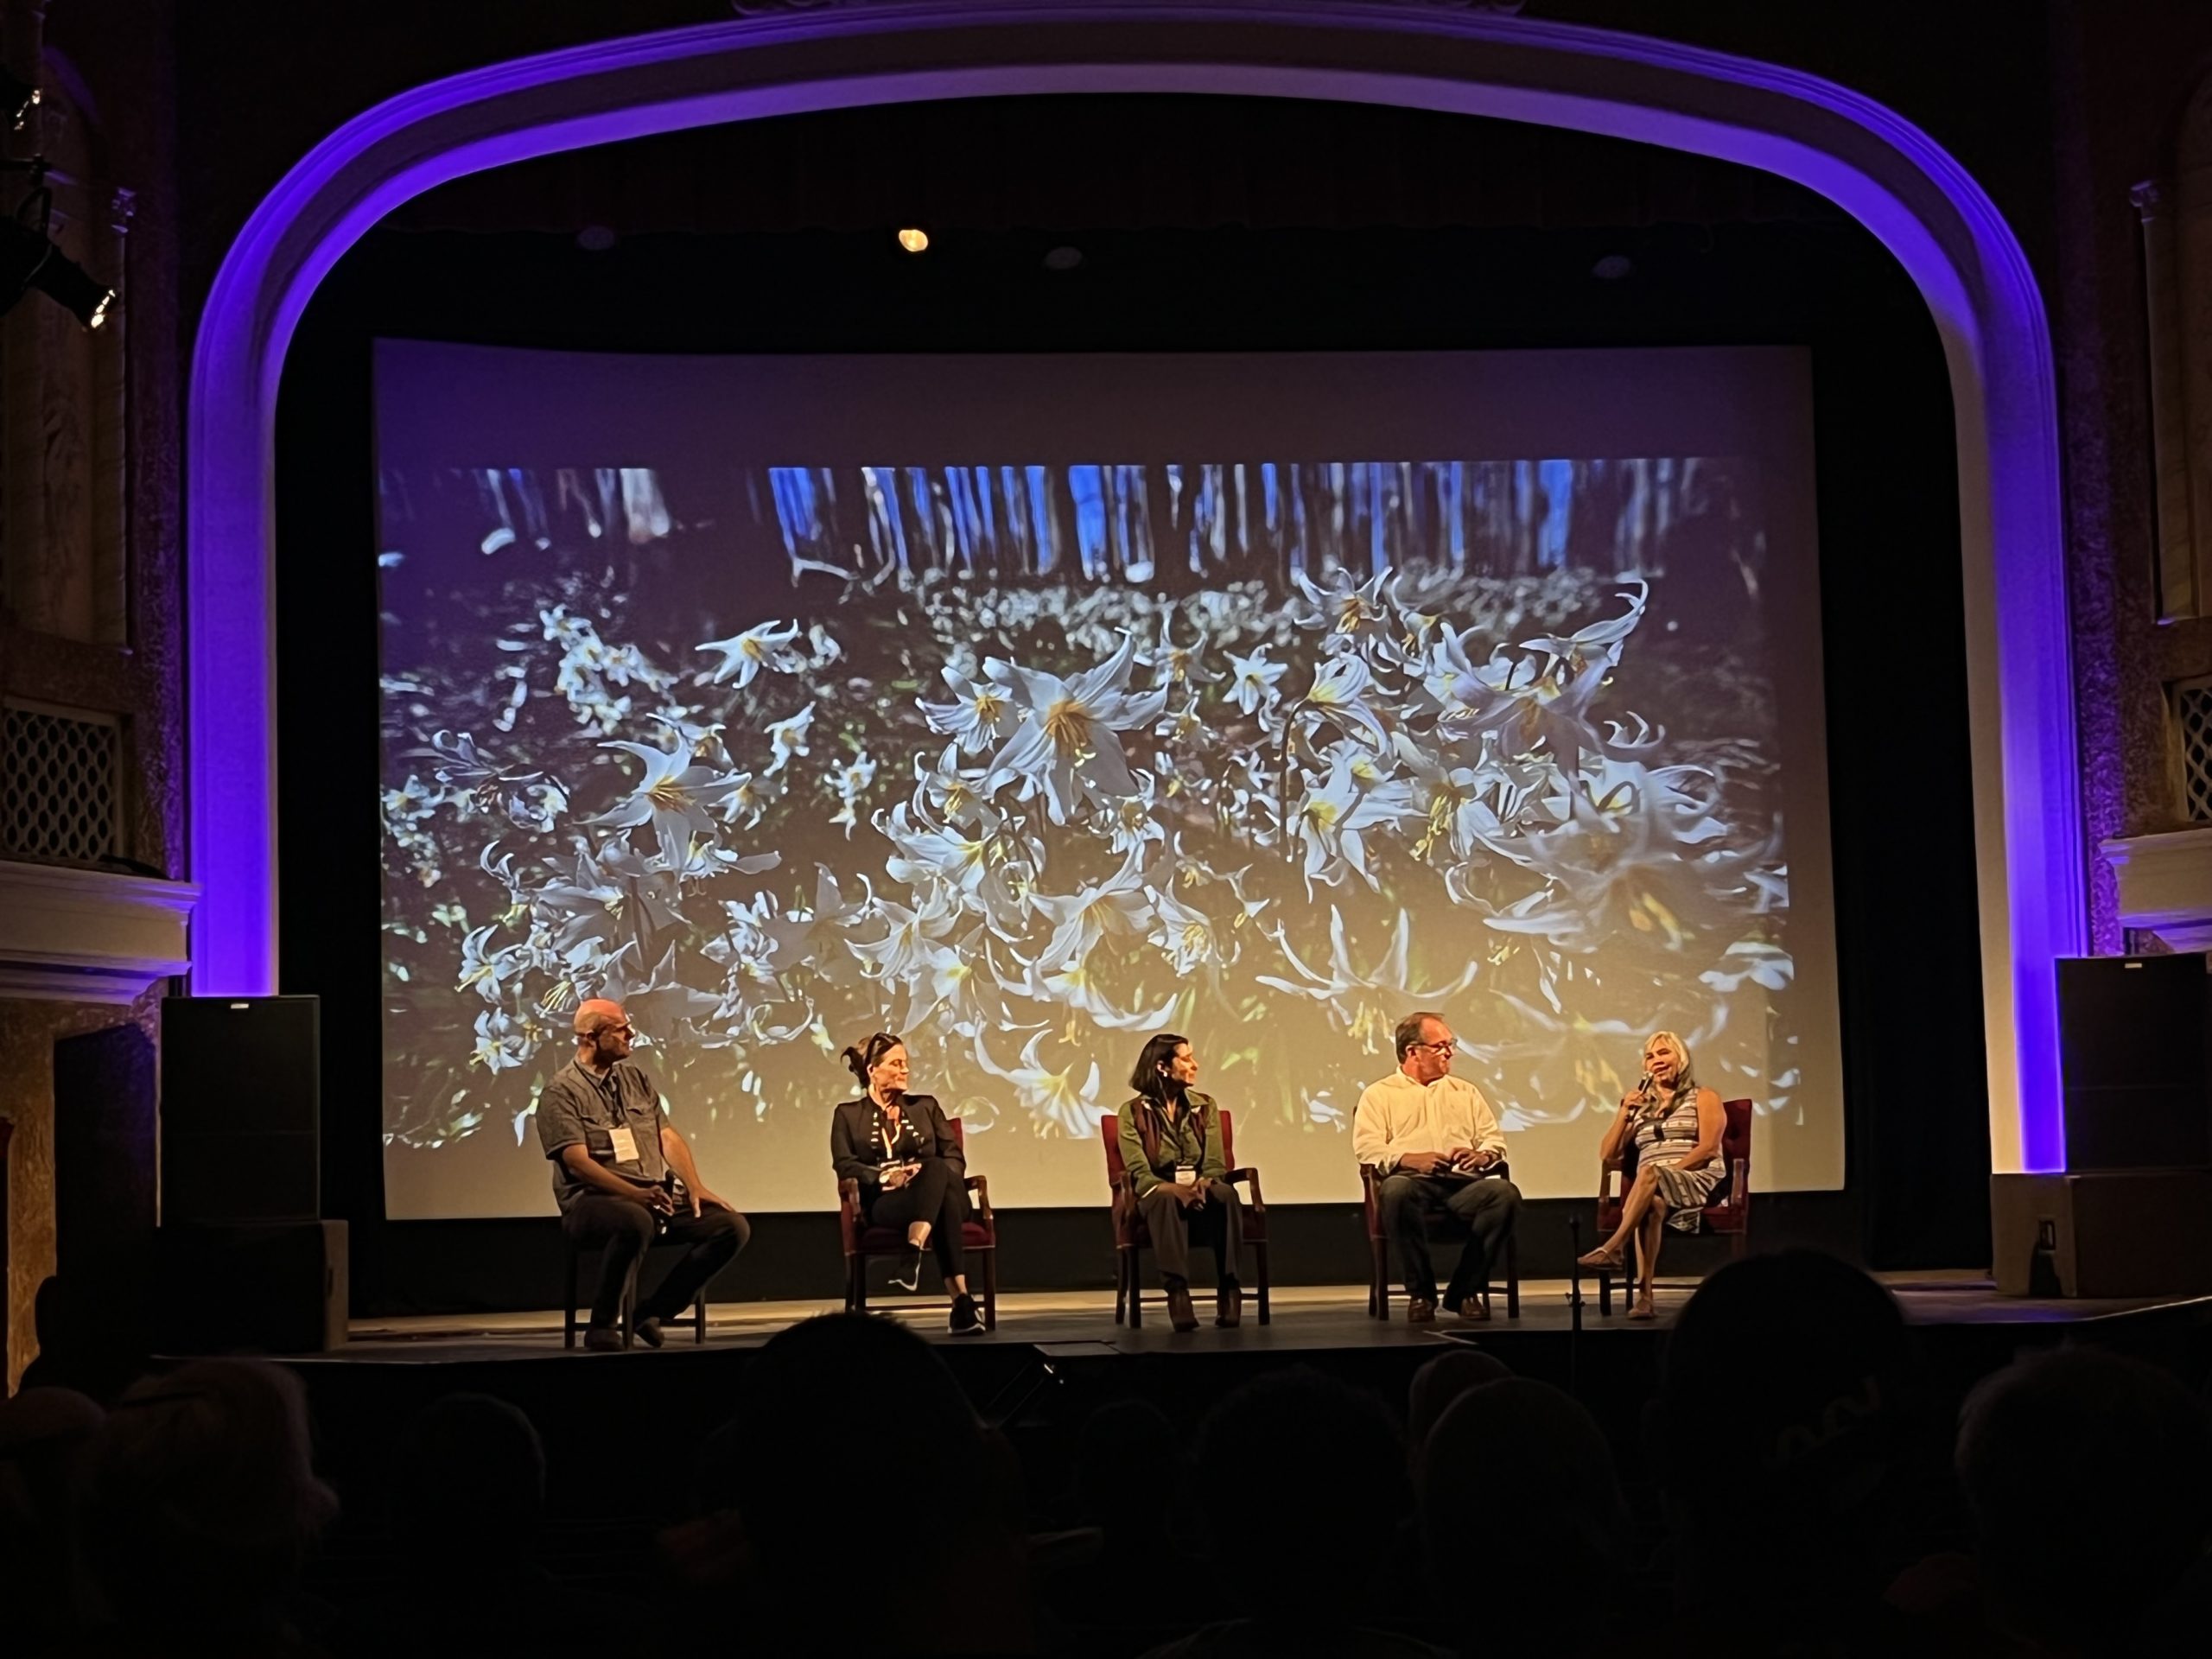 Following the film screening of Elemental, a panel fielded questions from the audience